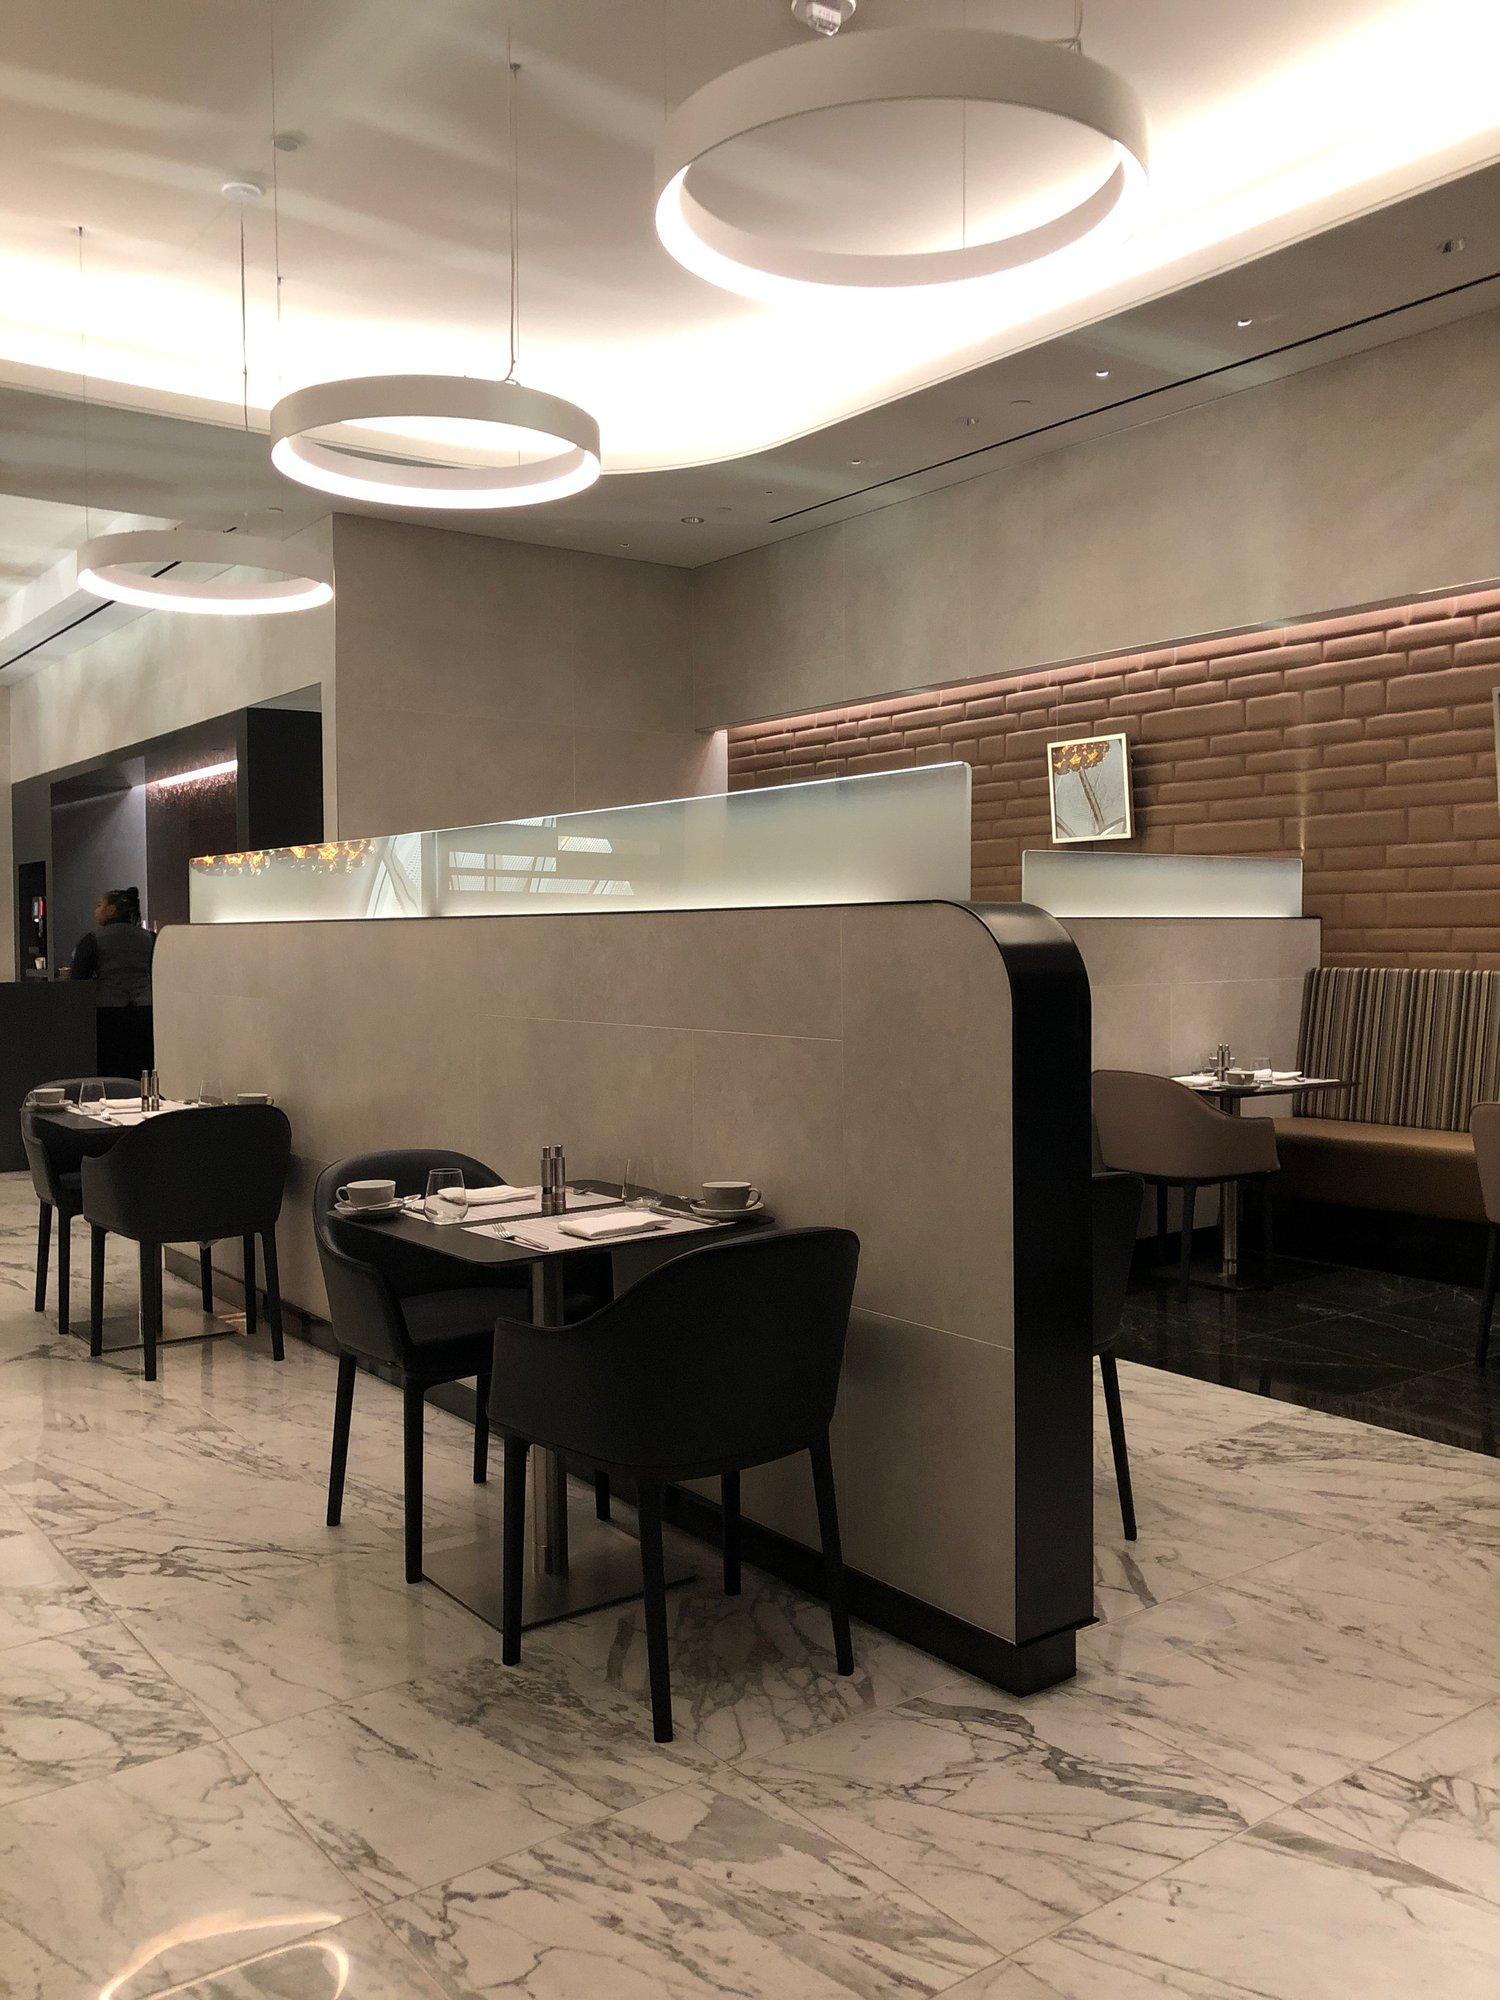 American Airlines Flagship First Dining  image 11 of 12